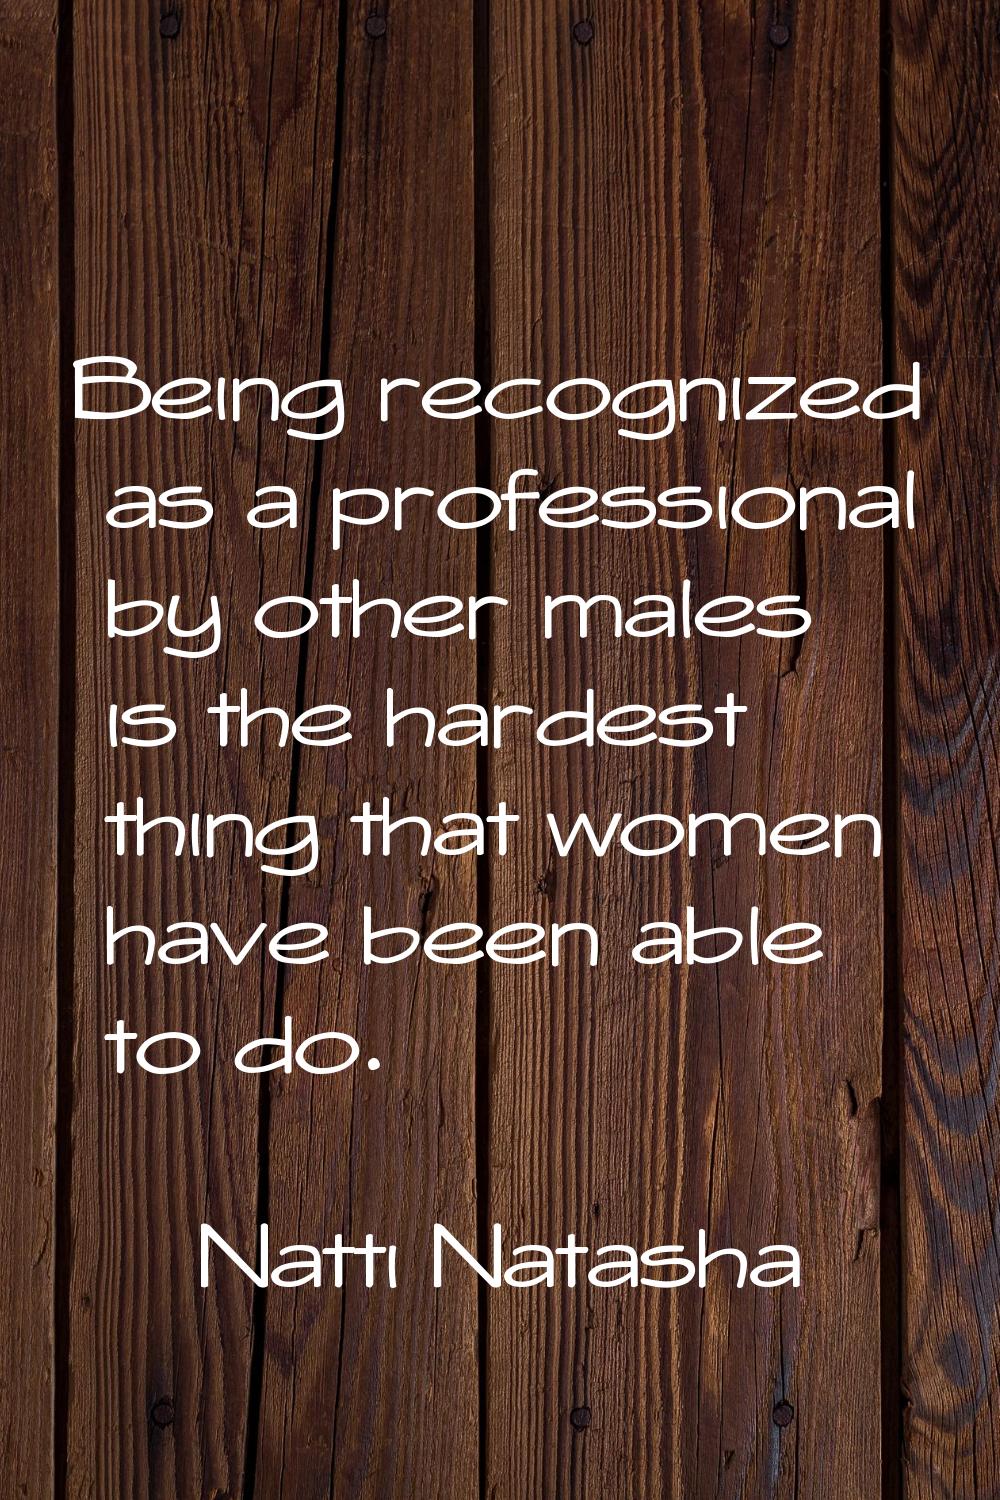 Being recognized as a professional by other males is the hardest thing that women have been able to